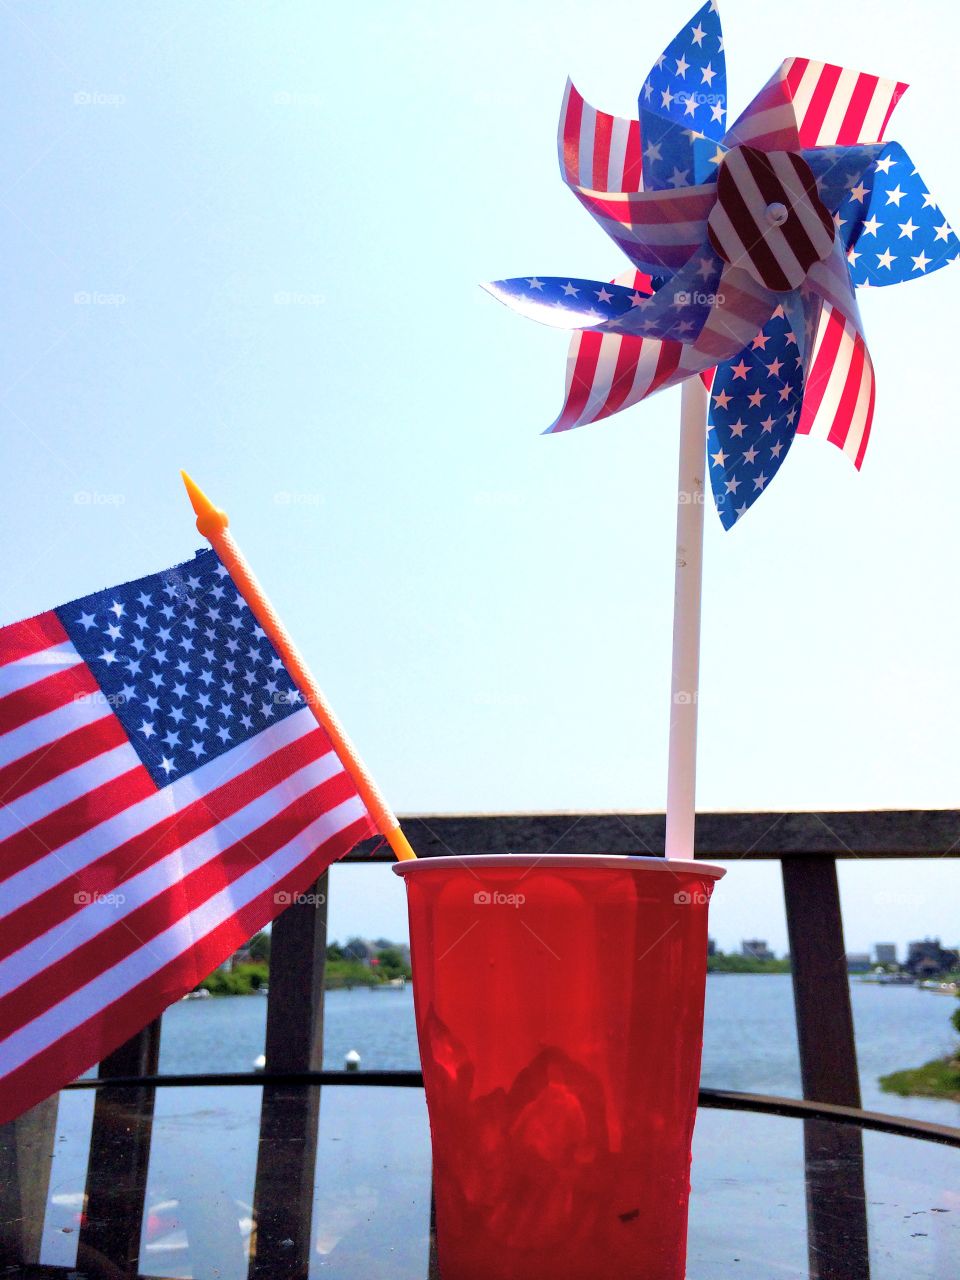 Stars and Stripes 2. Happy Fourth of July!
Small American flag and pinwheel in a red cup, with a small marina in the background.